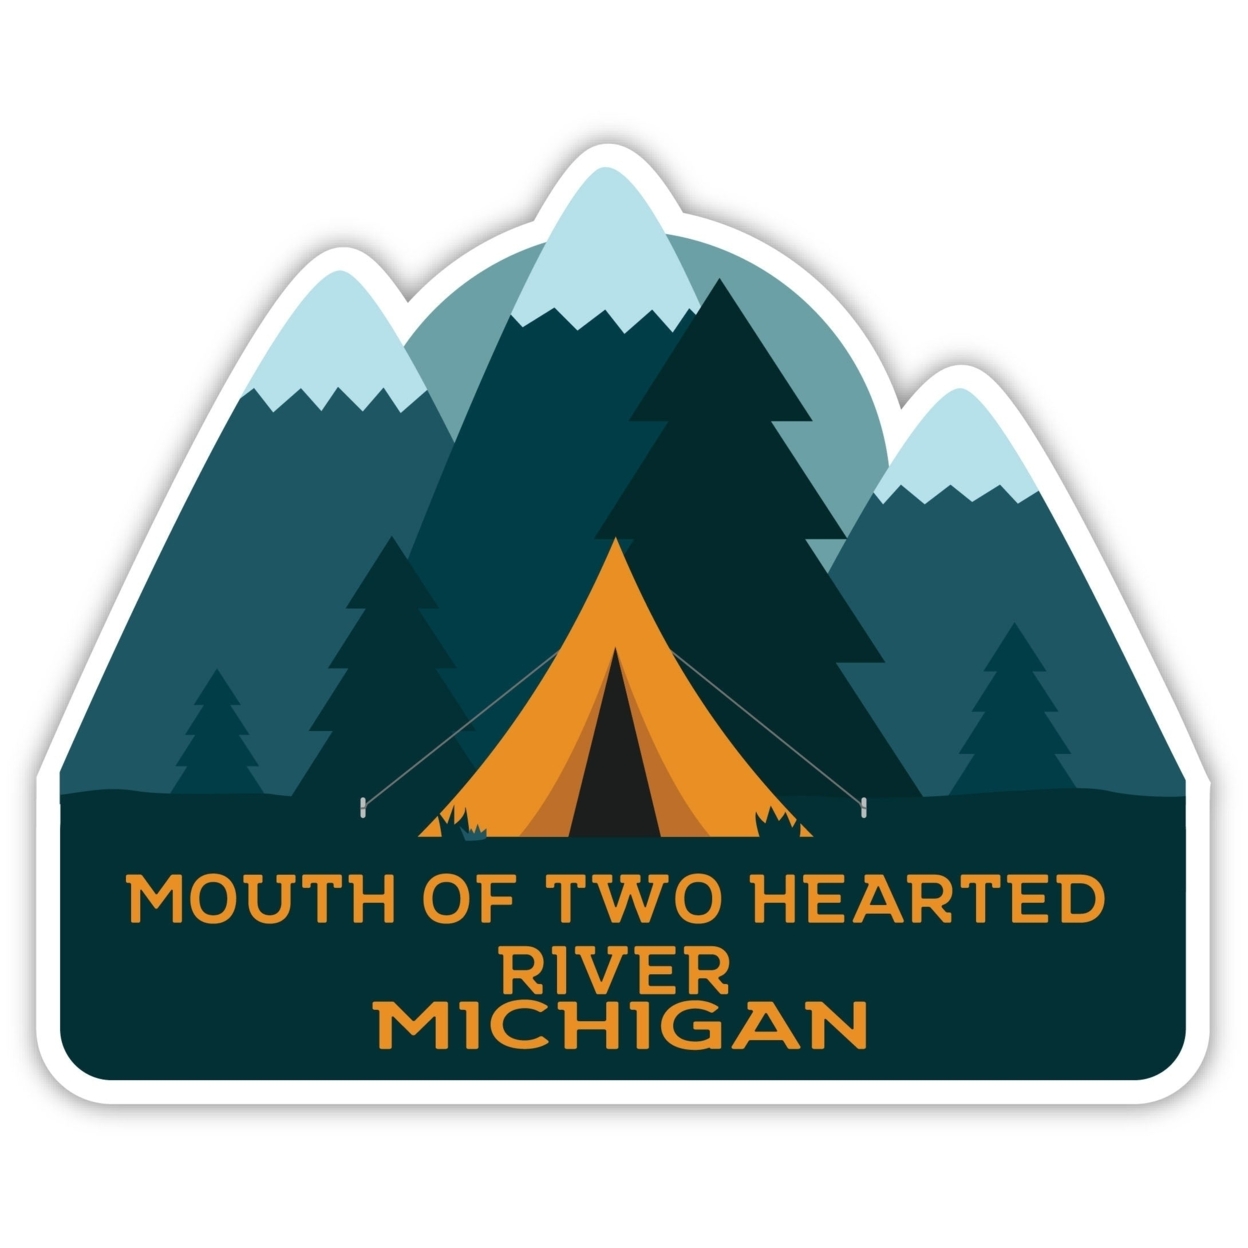 Mouth Of Two Hearted River Michigan Souvenir Decorative Stickers (Choose Theme And Size) - Single Unit, 2-Inch, Tent